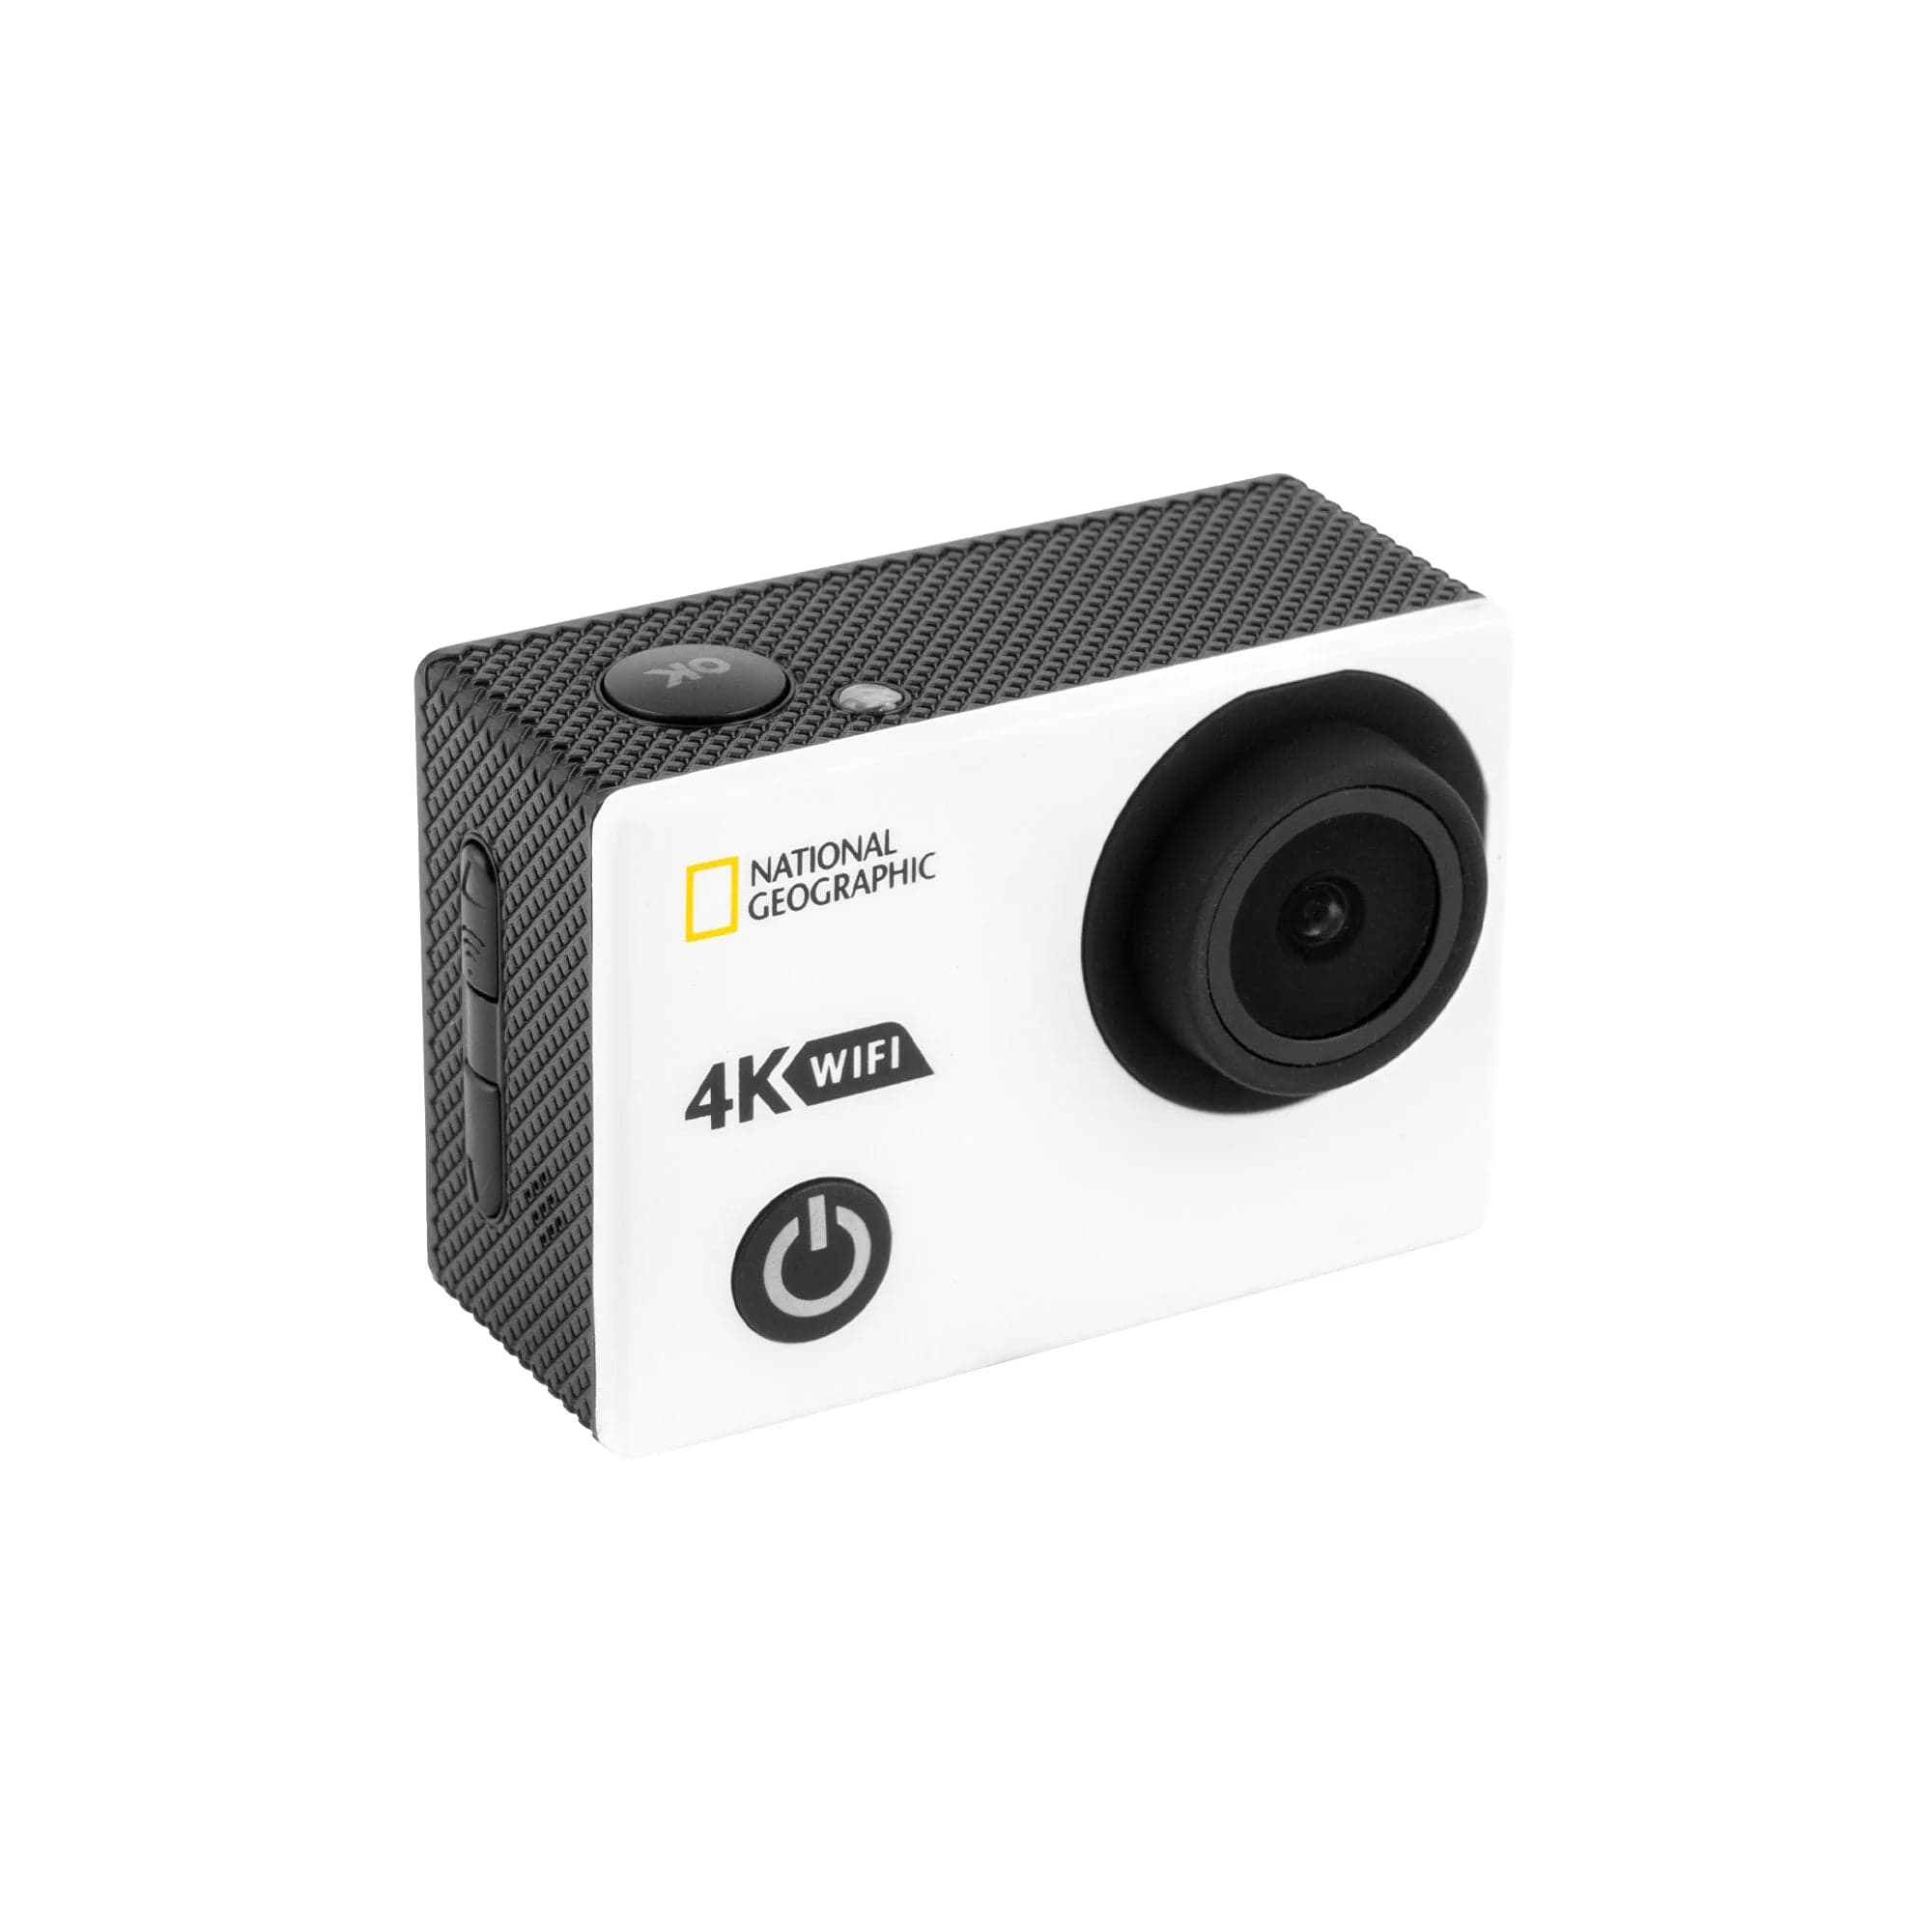 National Geographic Toy National Geographic 4K Action Camera with WiFi - 80-83002